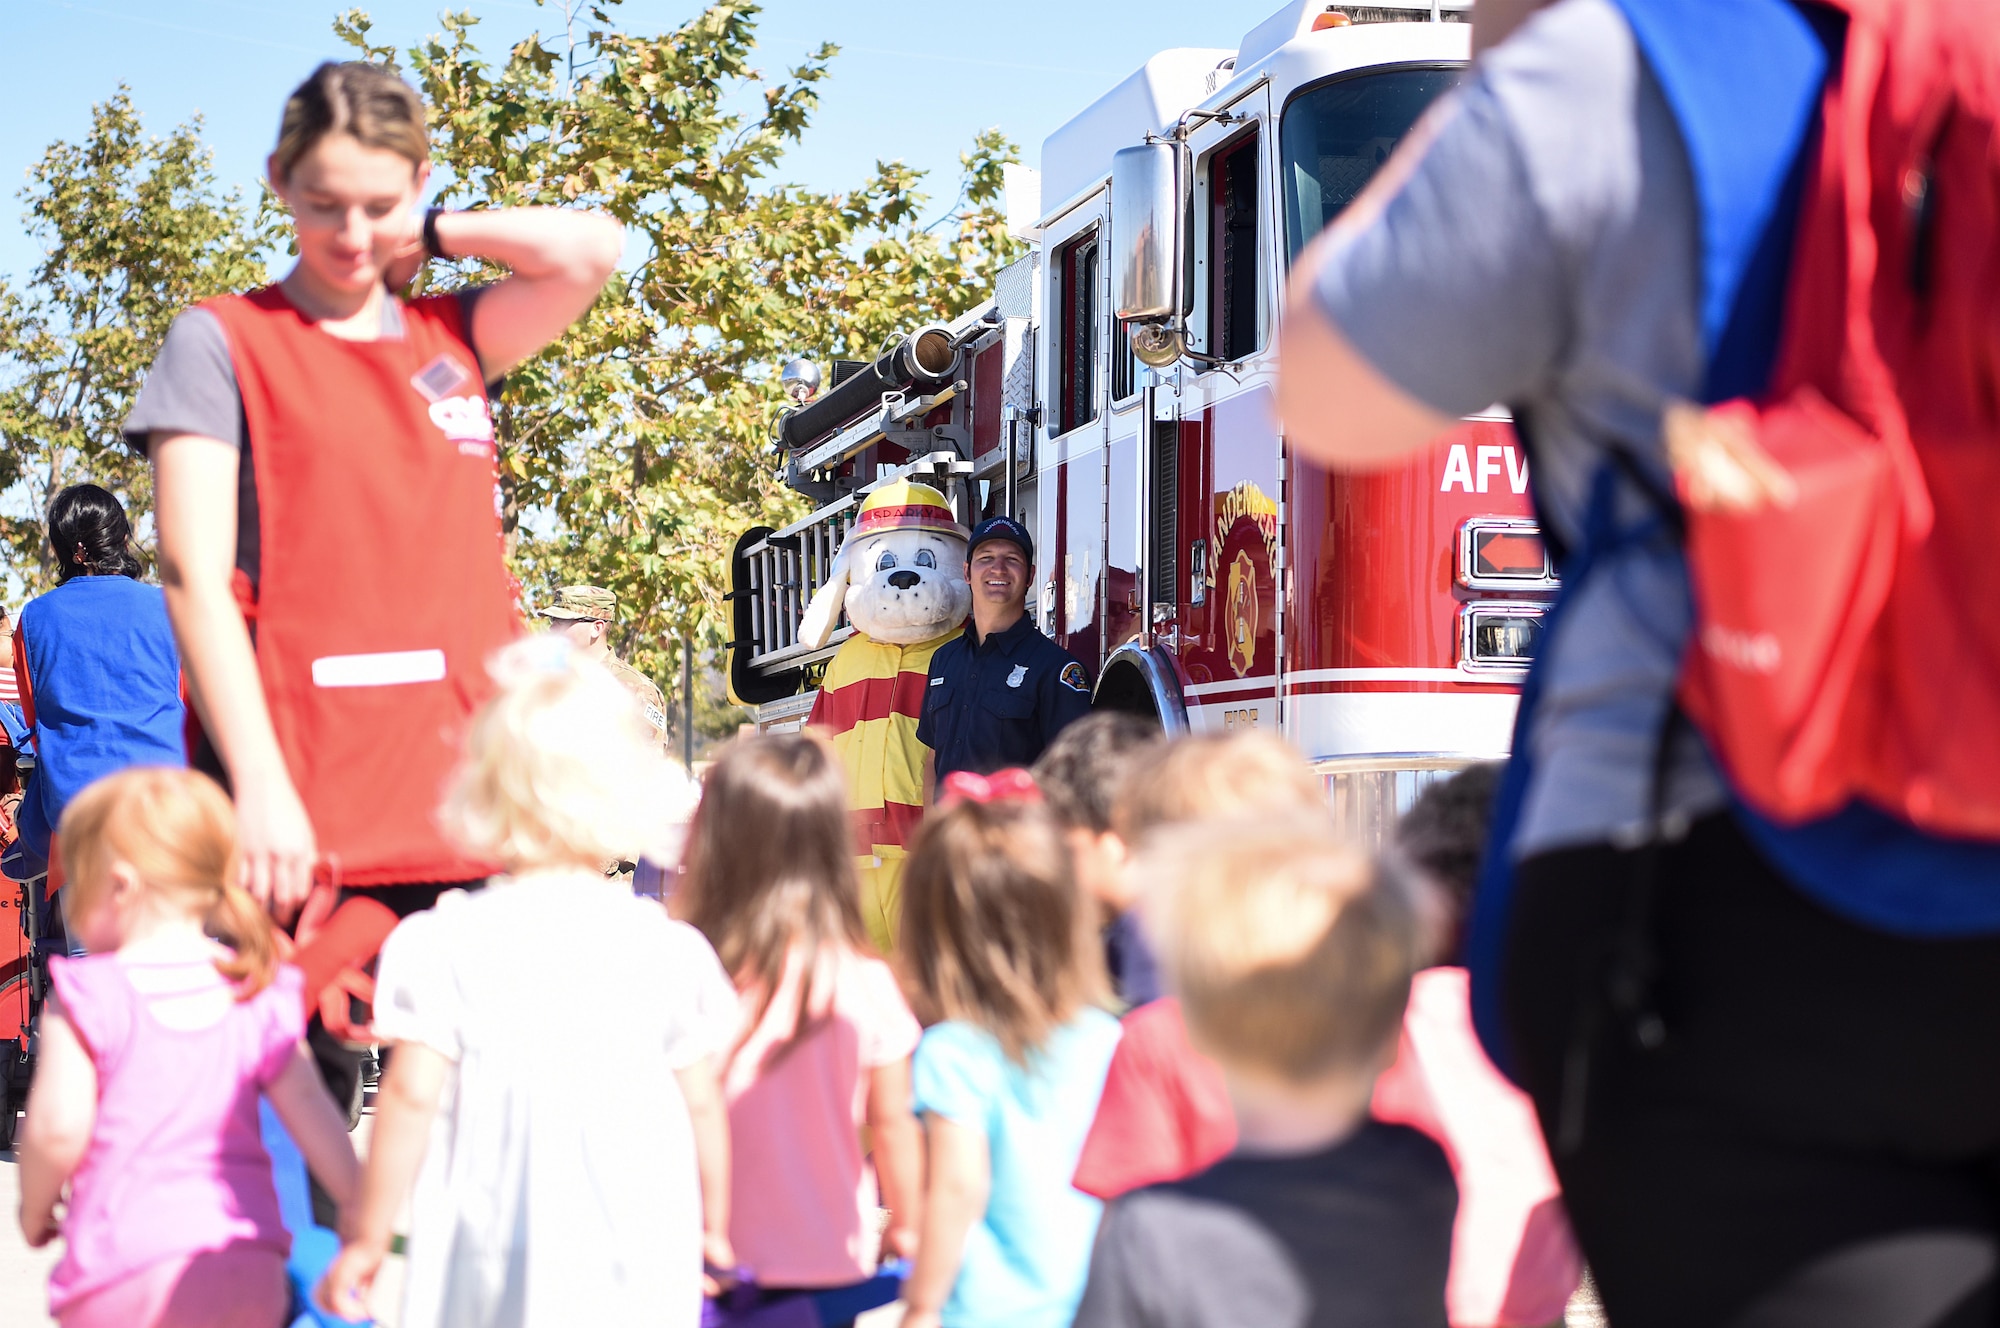 Sparky the fire dog greets children during Fire Prevention Week Oct. 7, 2019, at Vandenberg Air Force Base, Calif. Sparky, the mascot of the National Fire Protection Association, was created March 18, 1951, to convey important fire safety messages to children and adults. (U.S. Air Force photo by Airman 1st Class Hanah Abercrombie)